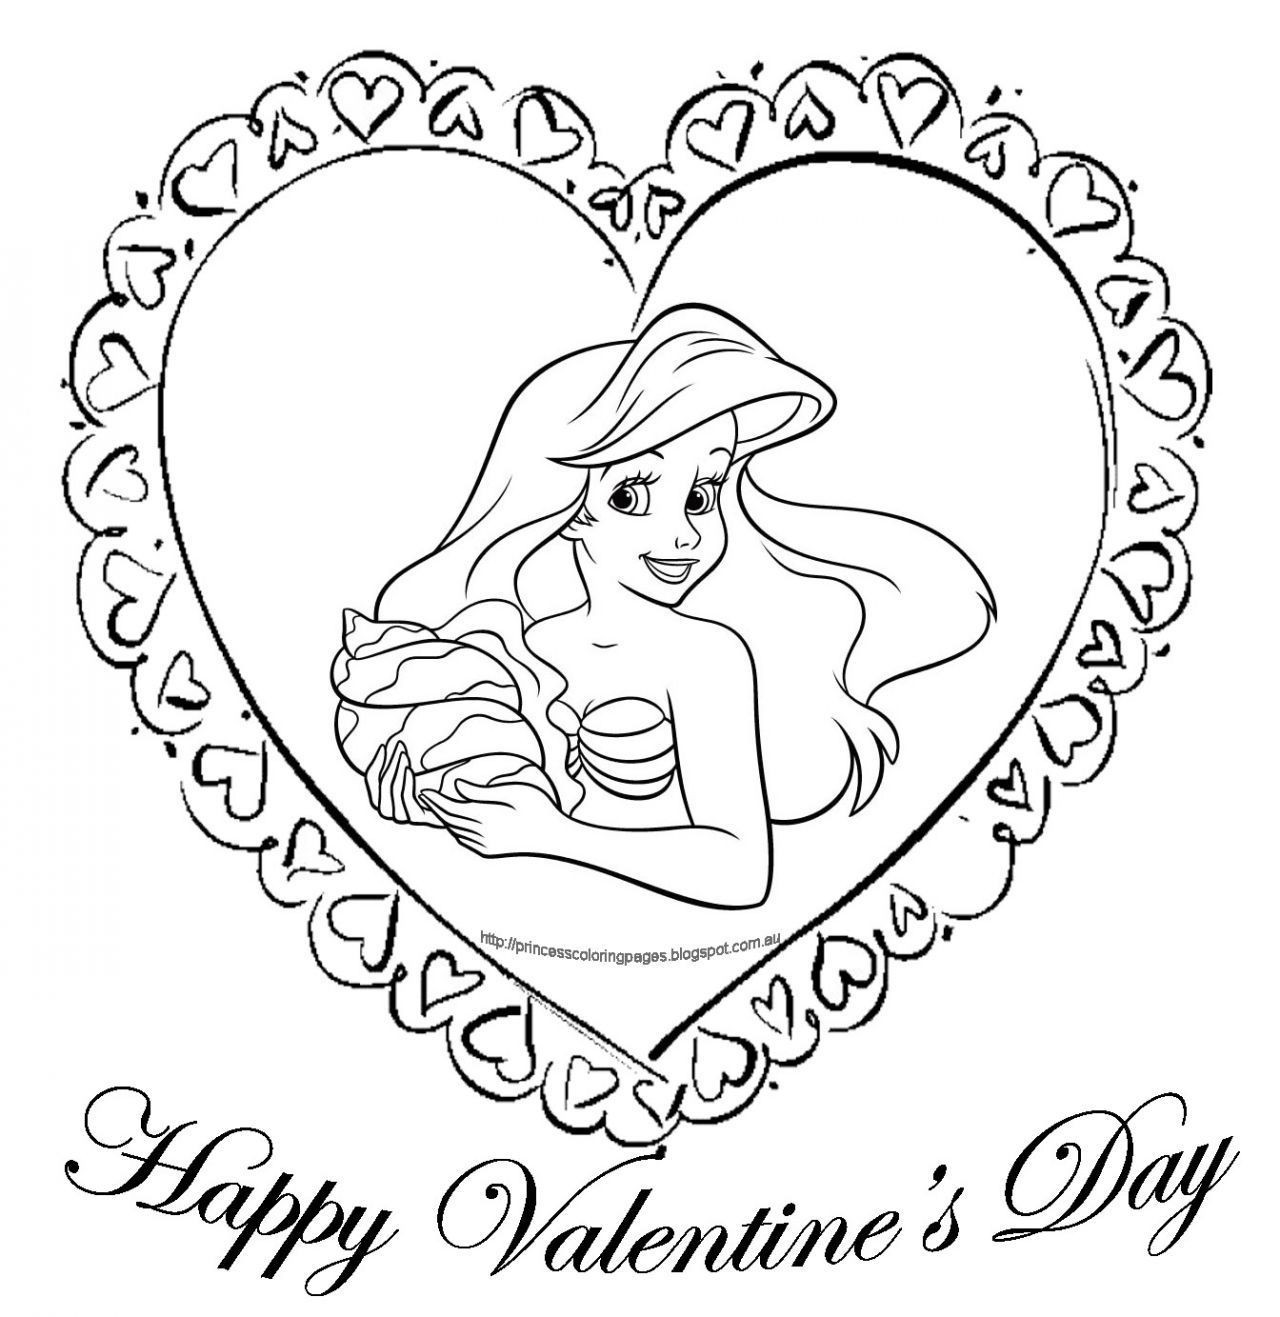 Awesome Ariel Little Mermaid Princess For Happy Valentines Day As Well Pict Coloring Pages Printable Trend And Kids Style